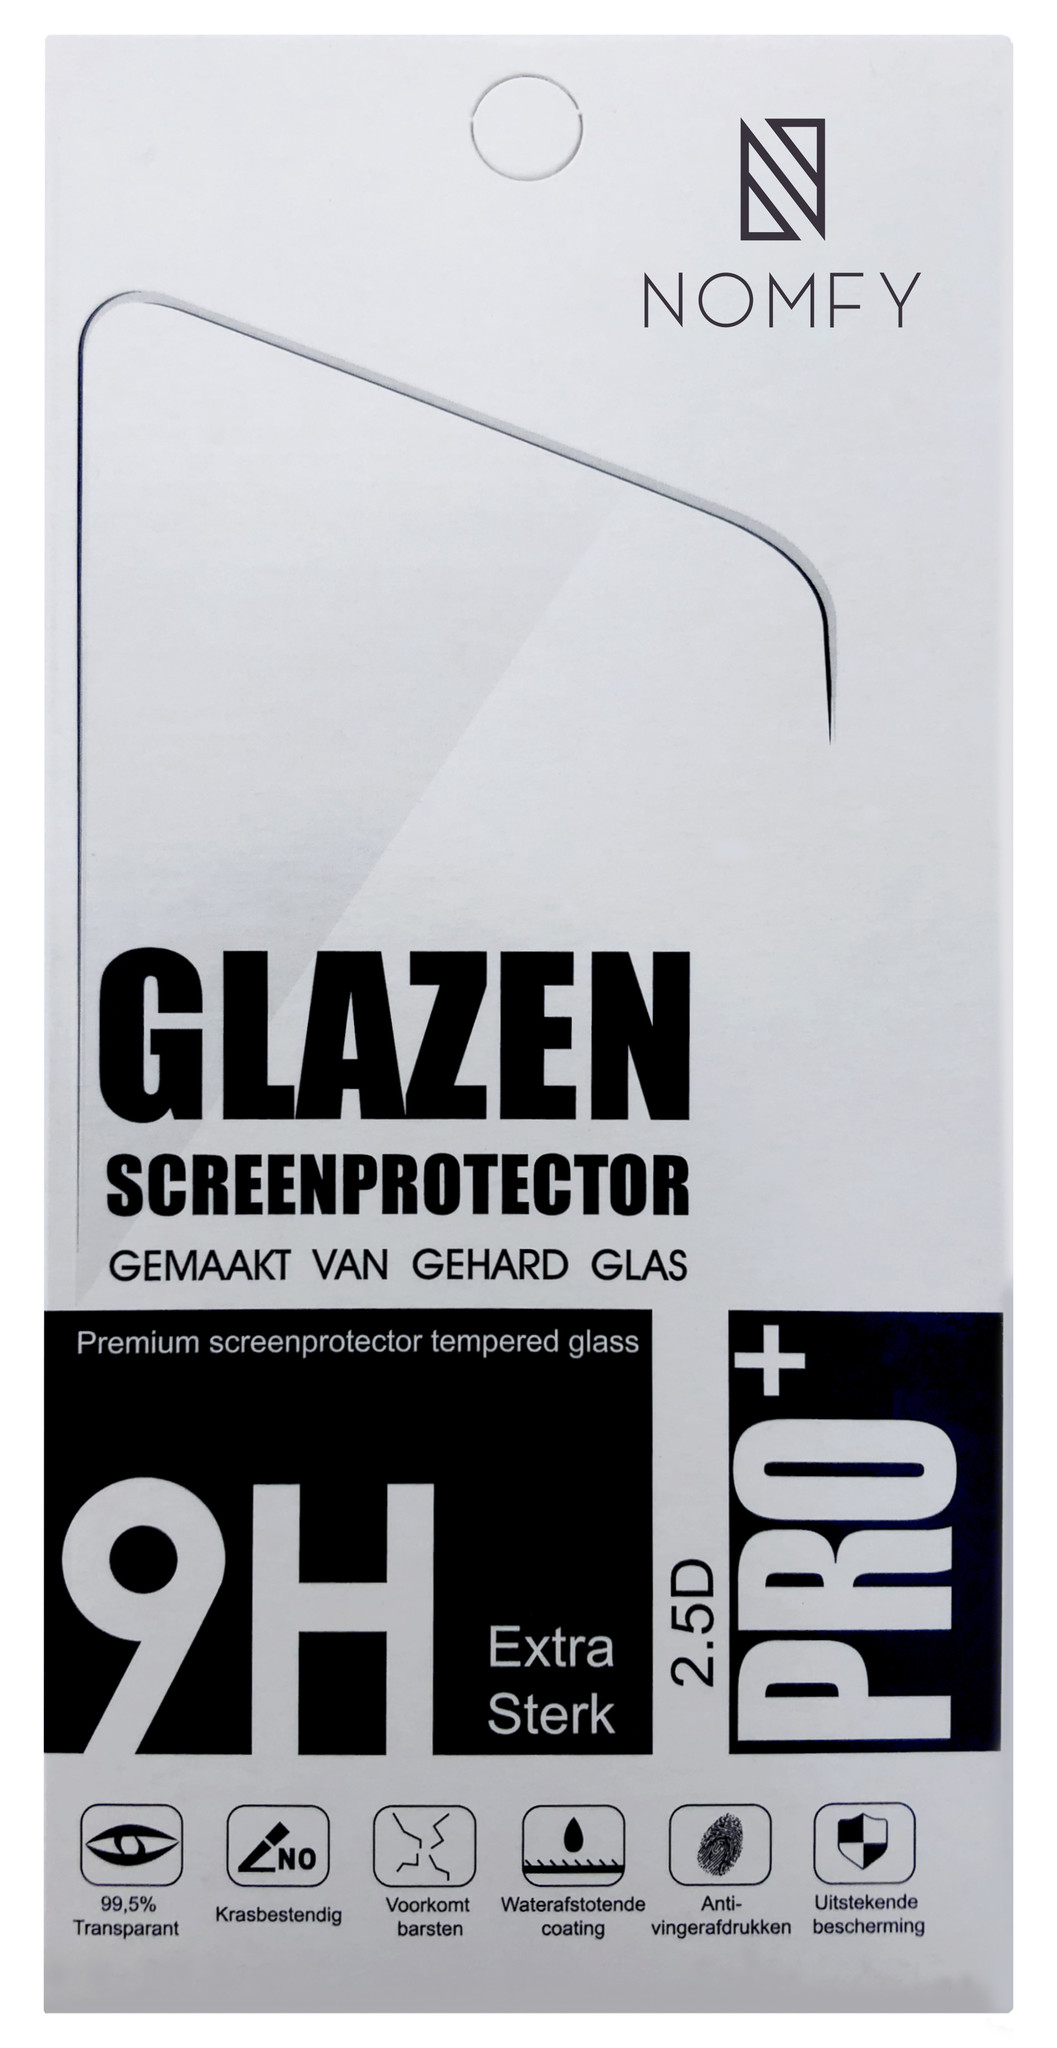 Samsung S21 FE Screenprotector Bescherm Glas Tempered Glass Full Cover - Samsung Galaxy S21 FE Screen Protector